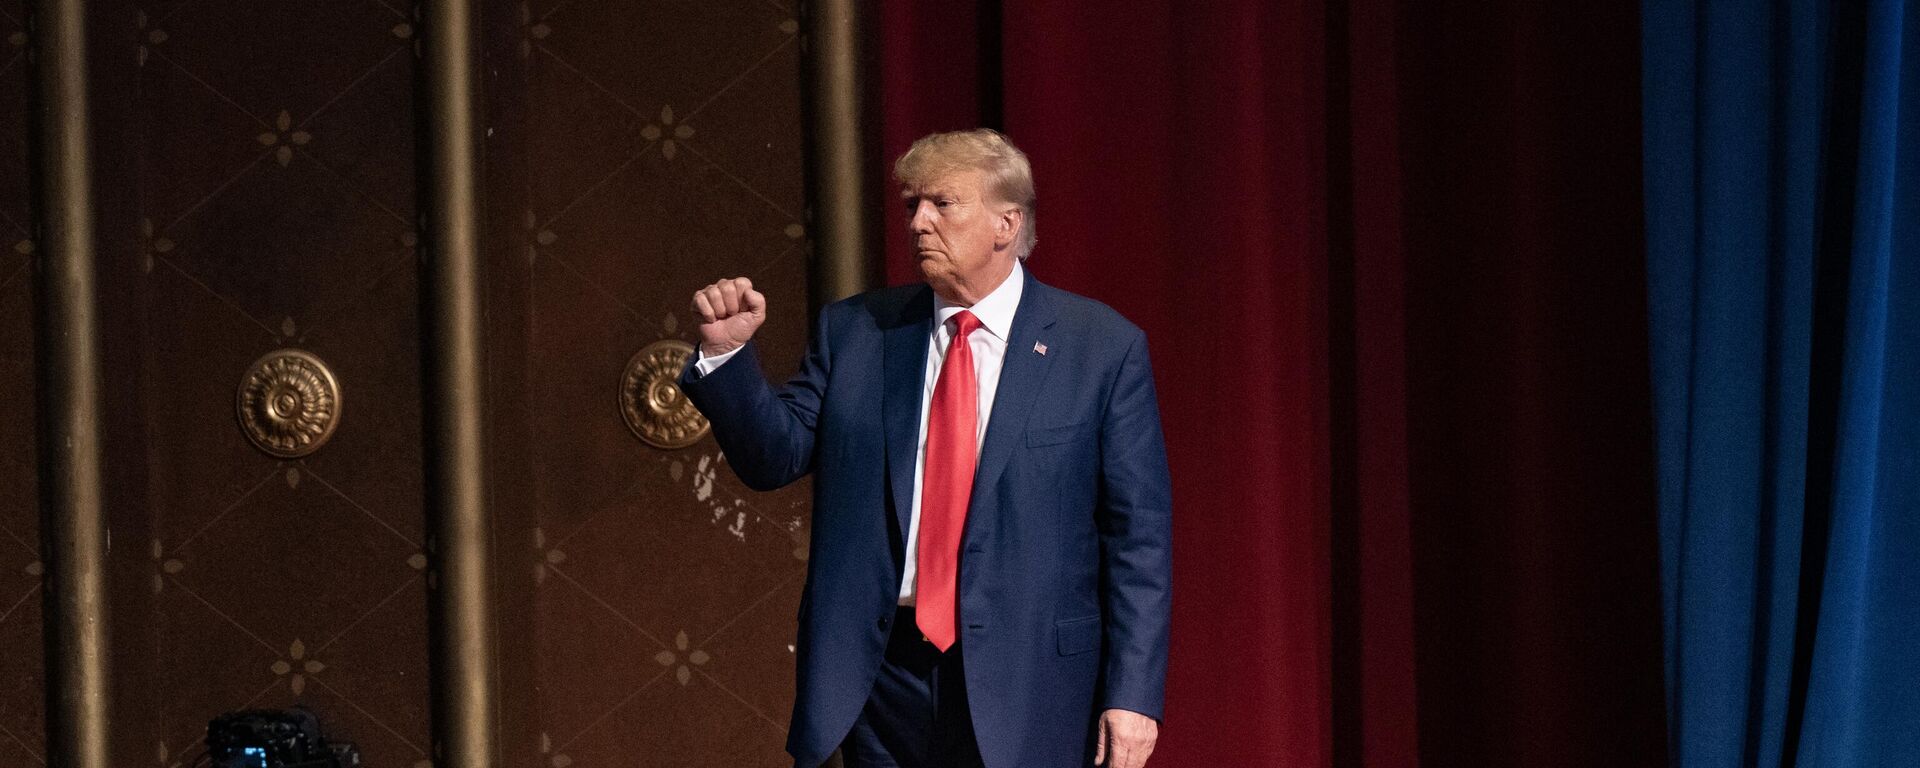 Former US President and 2024 Presidential hopeful Donald Trump gestures as he leaves after speaking at the North Carolina Republican Party Convention in Greensboro, North Carolina, on June 10, 2023 - Sputnik International, 1920, 13.06.2023